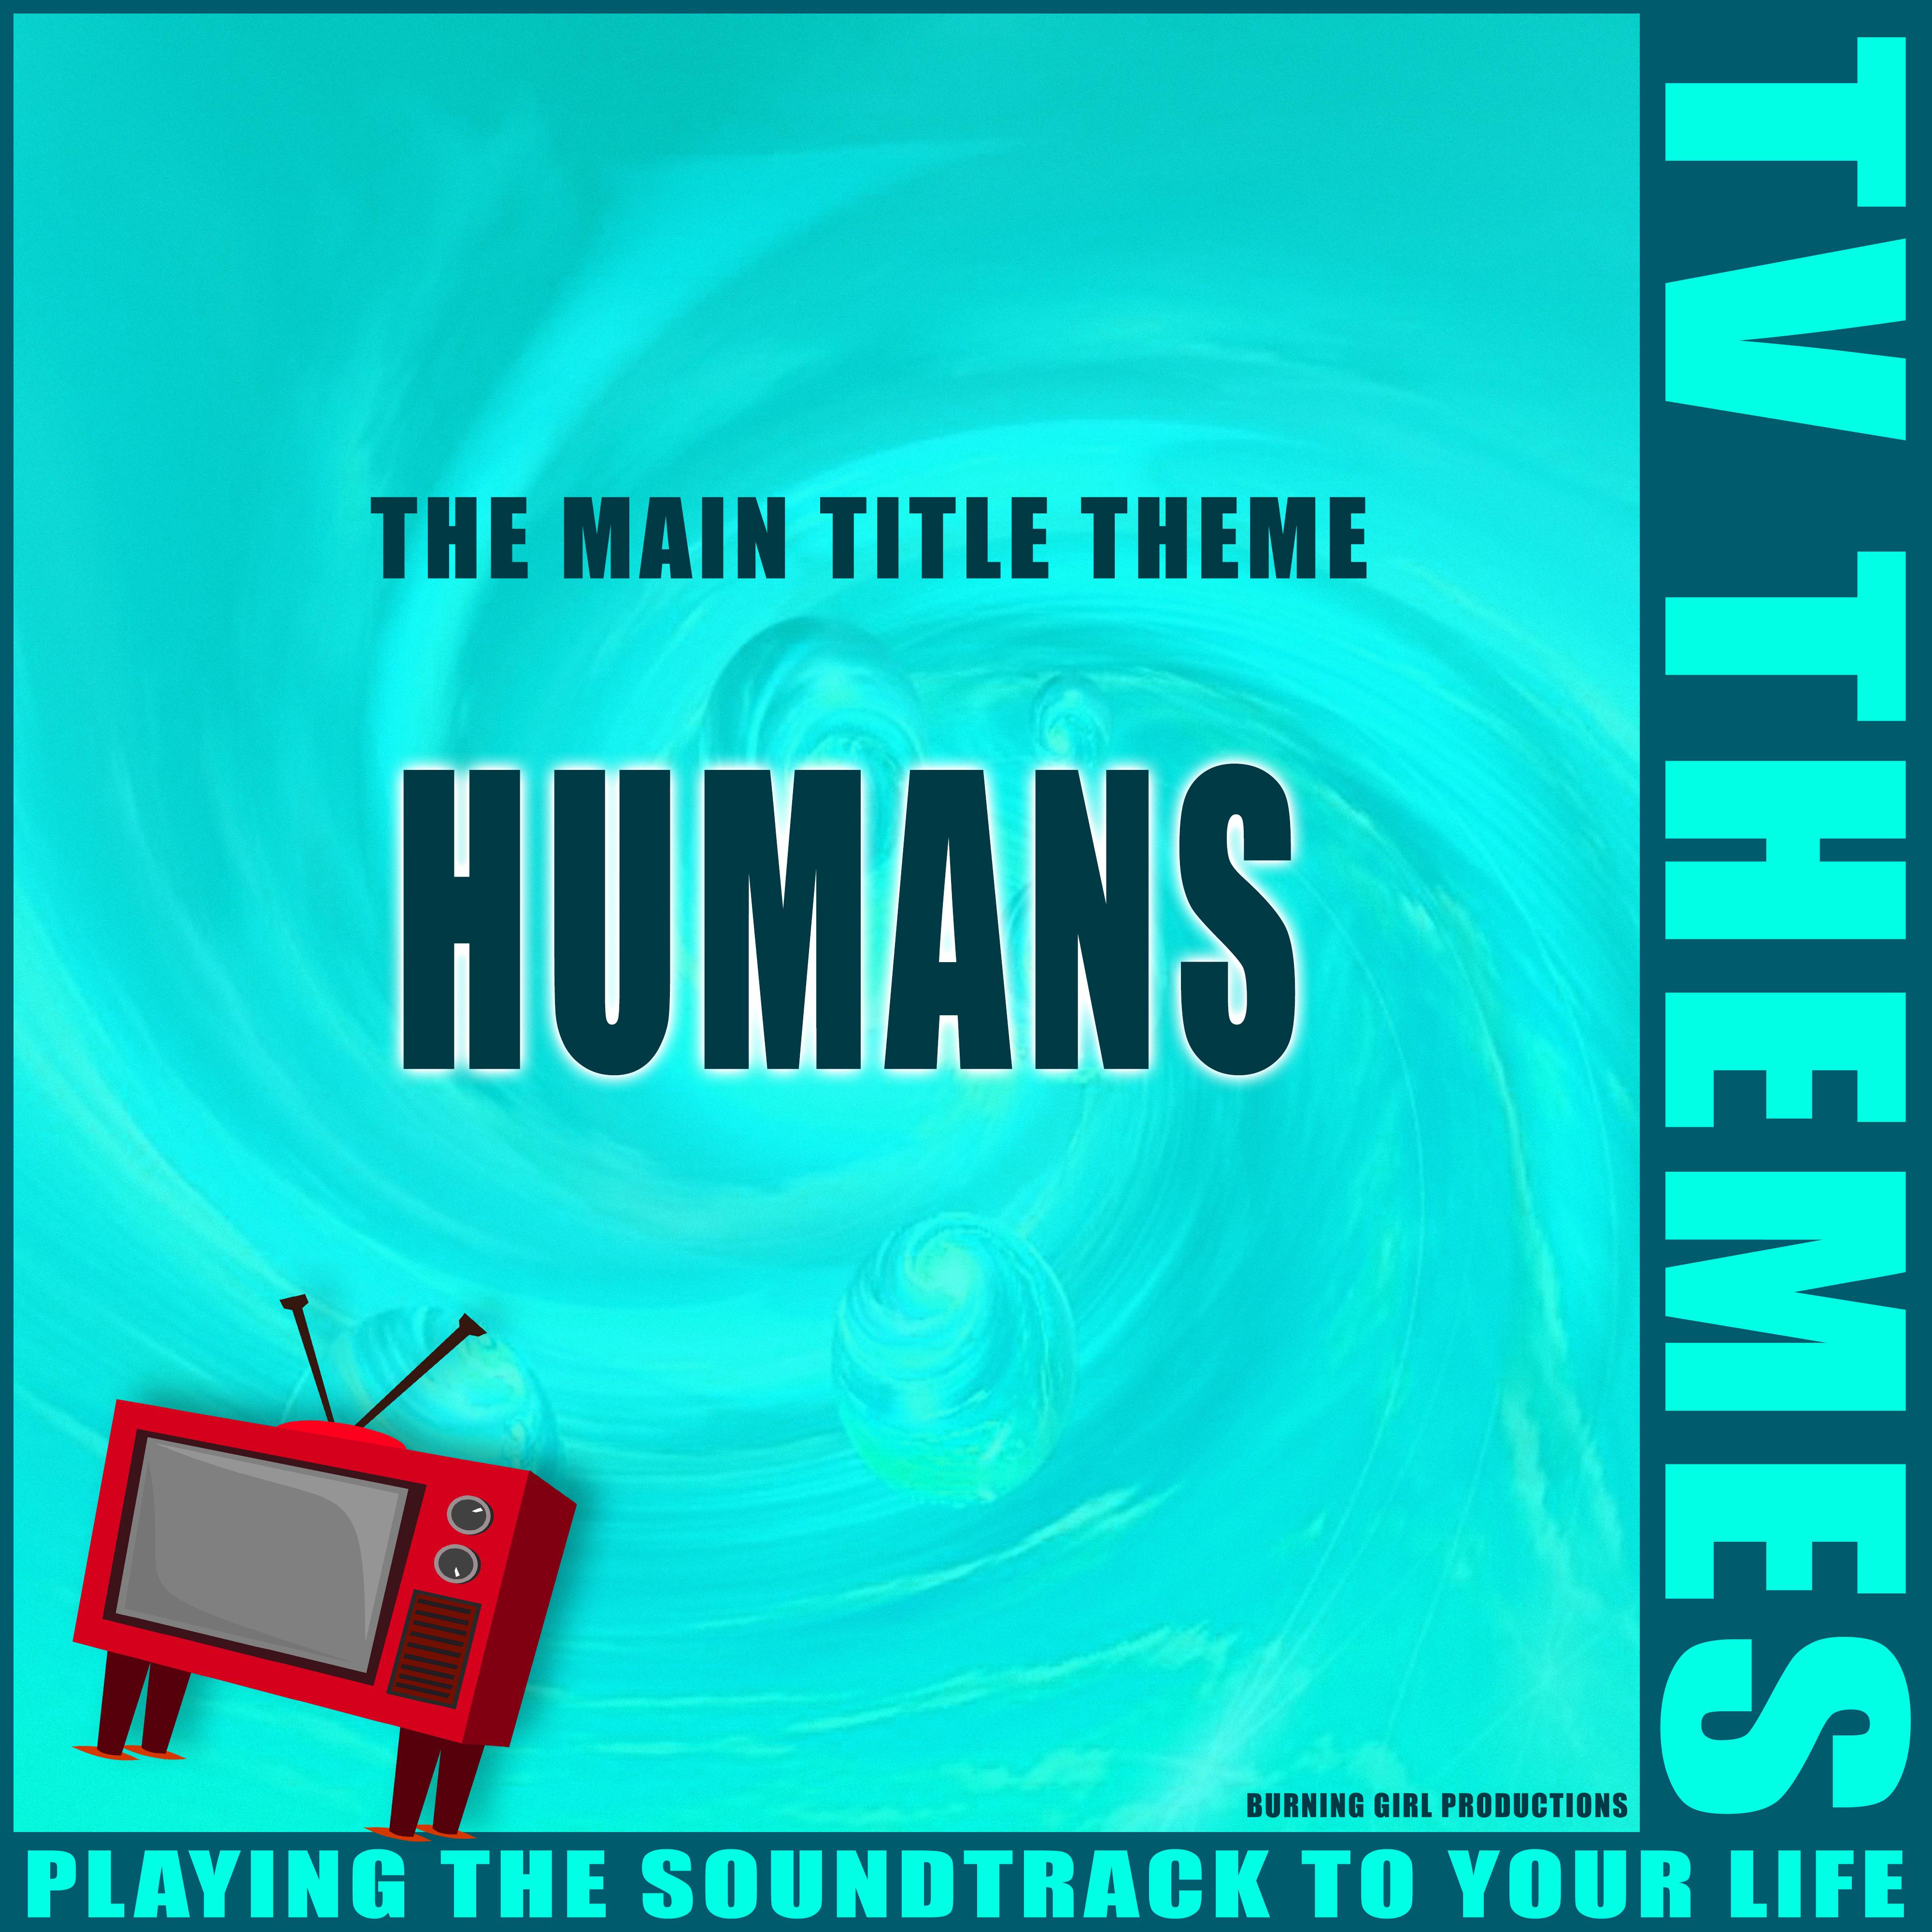 The Main Title Theme - Humans